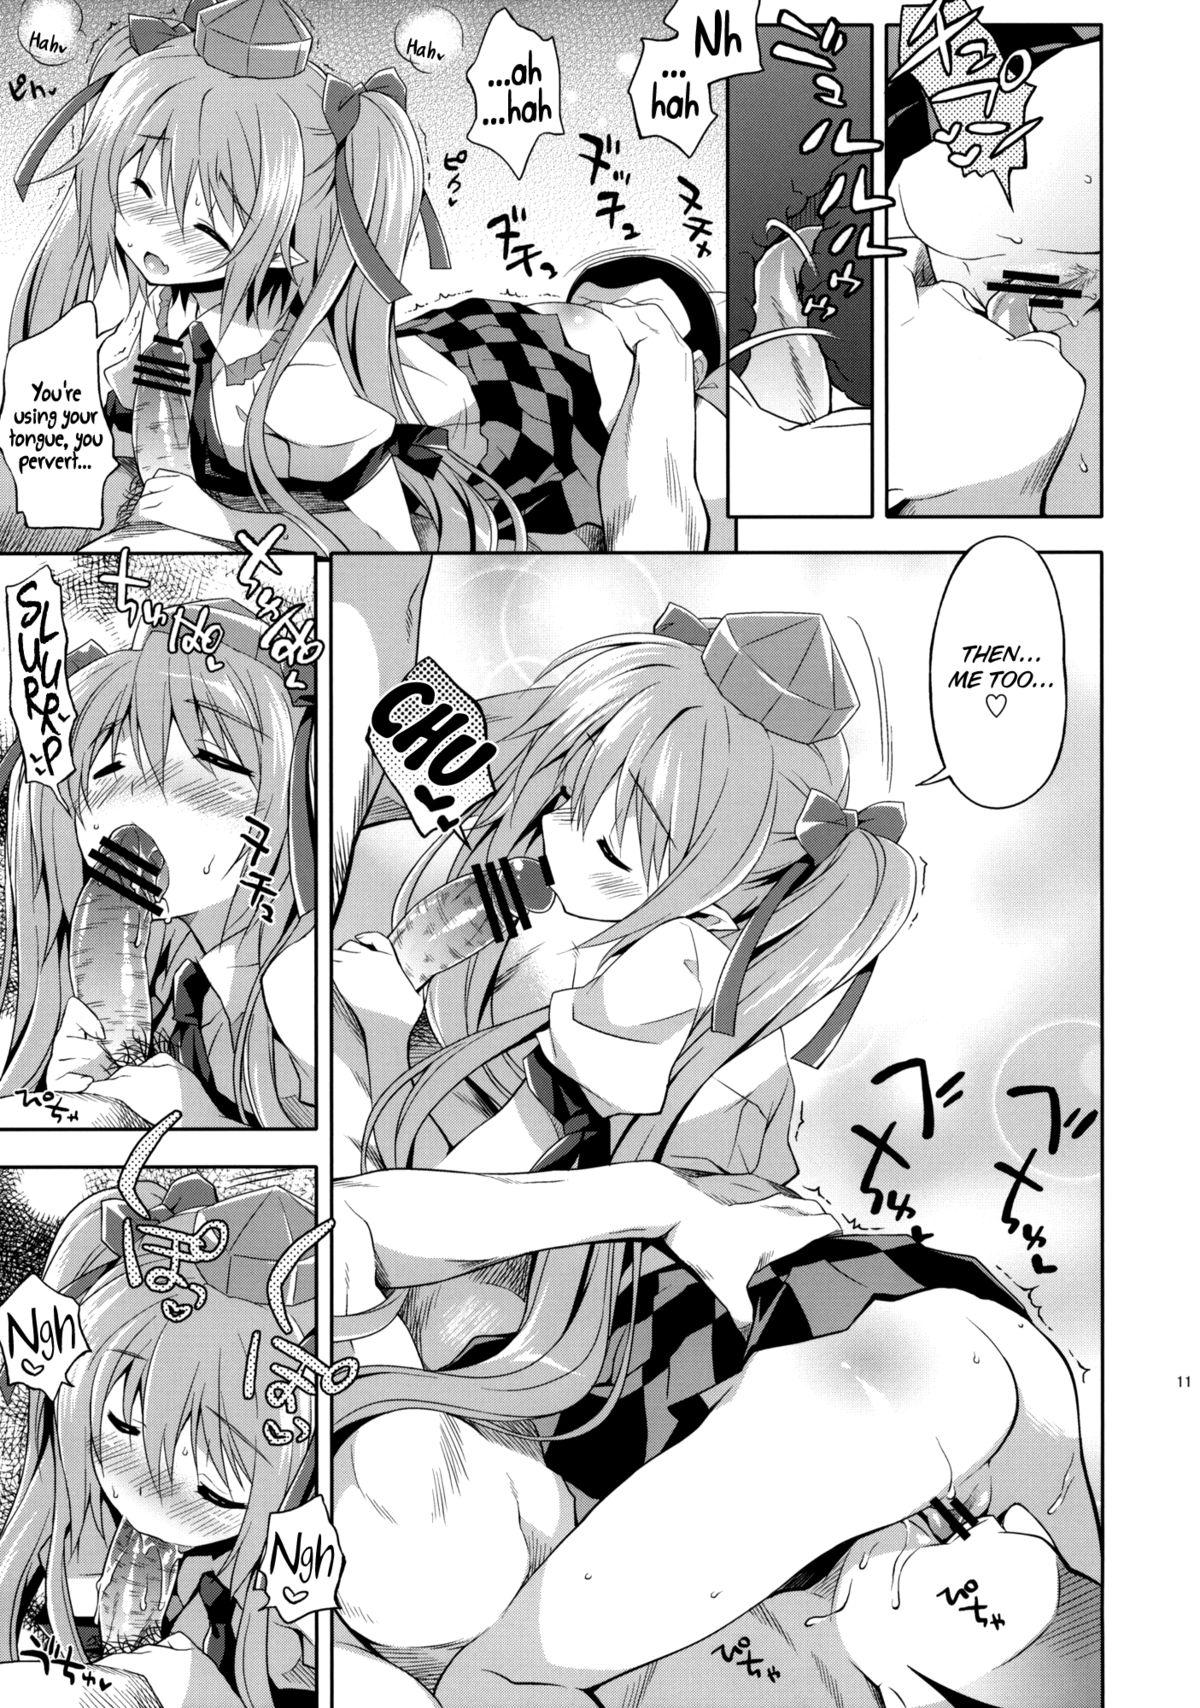 Ametur Porn Hatate no Binwan Shuzairoku | Record of Hatate's Competent Fact-Finding - Touhou project Interracial Sex - Page 10